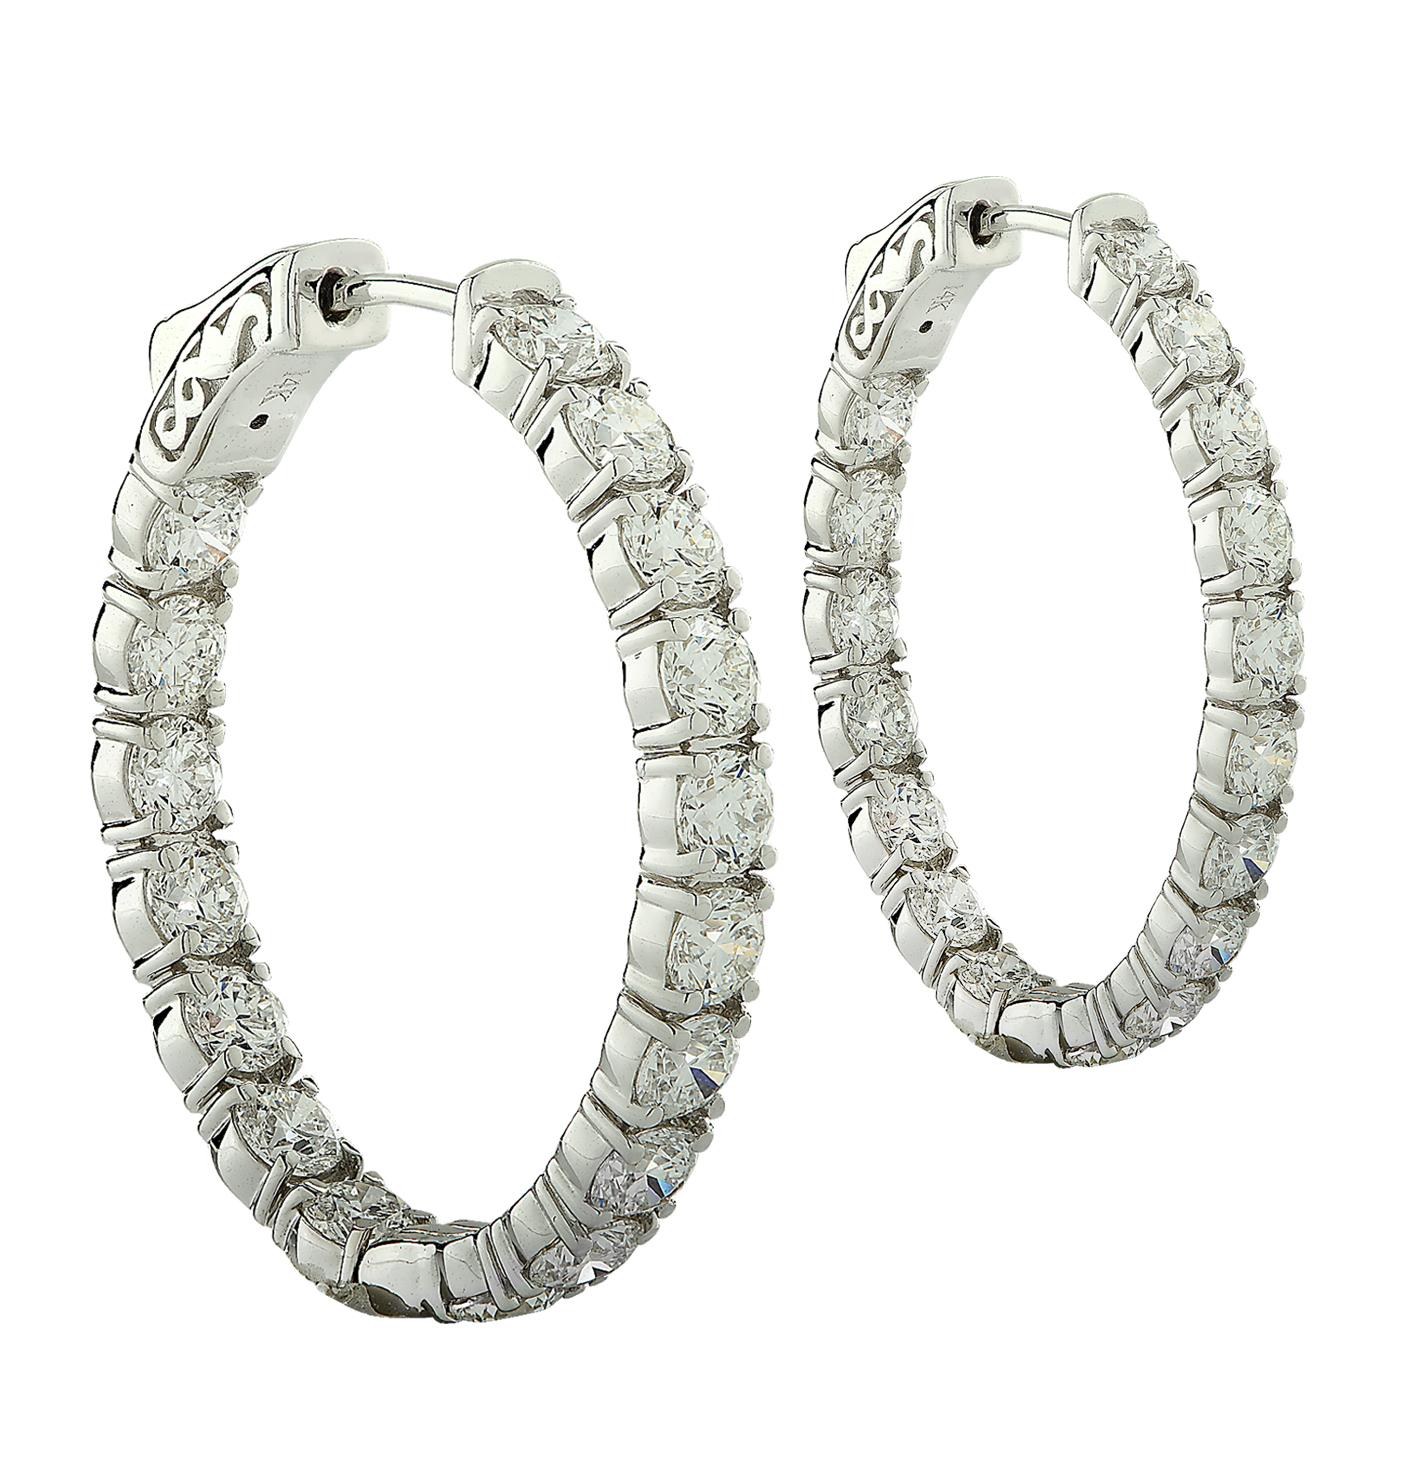 Spectacular Vivid Diamonds In/Out diamond hoop earrings crafted in white gold showcasing 34 round brilliant cut diamonds weighing 6.27 carats total, E-F color, VS-SI color. Each diamond is carefully selected, perfectly matched and set on the inside